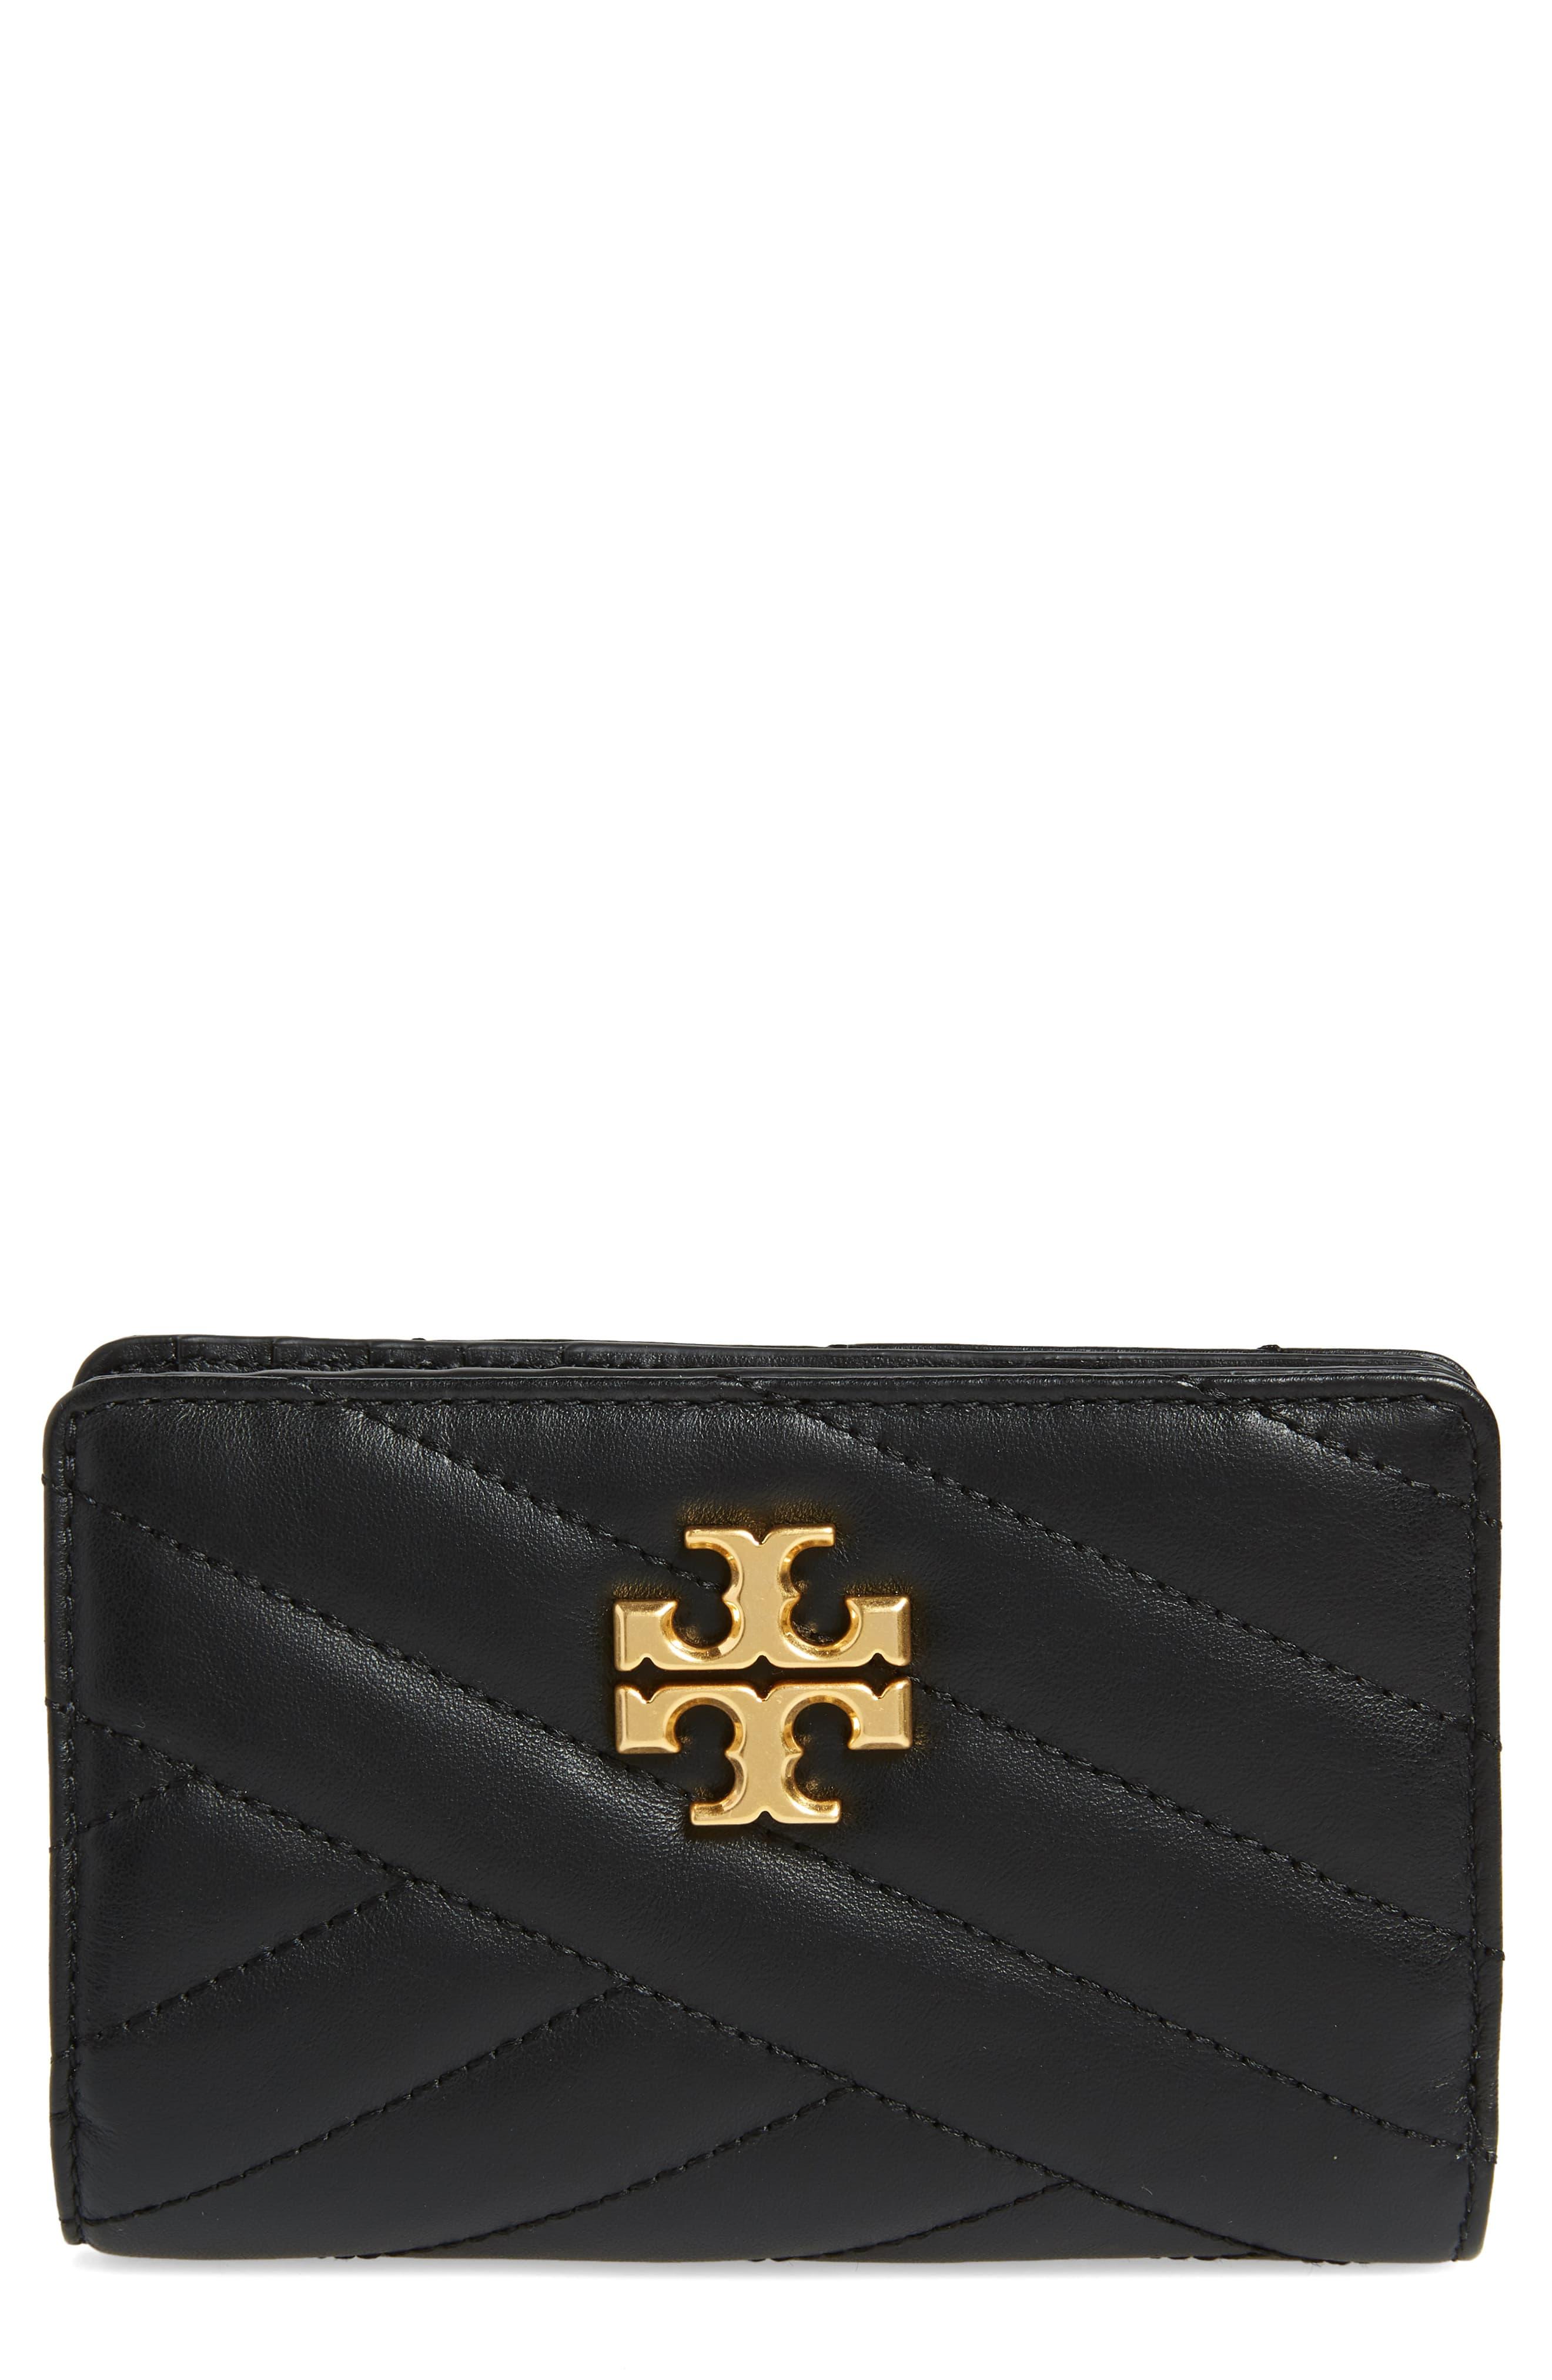 Tory Burch Medium Kira Quilted Leather Wallet in Black - Lyst